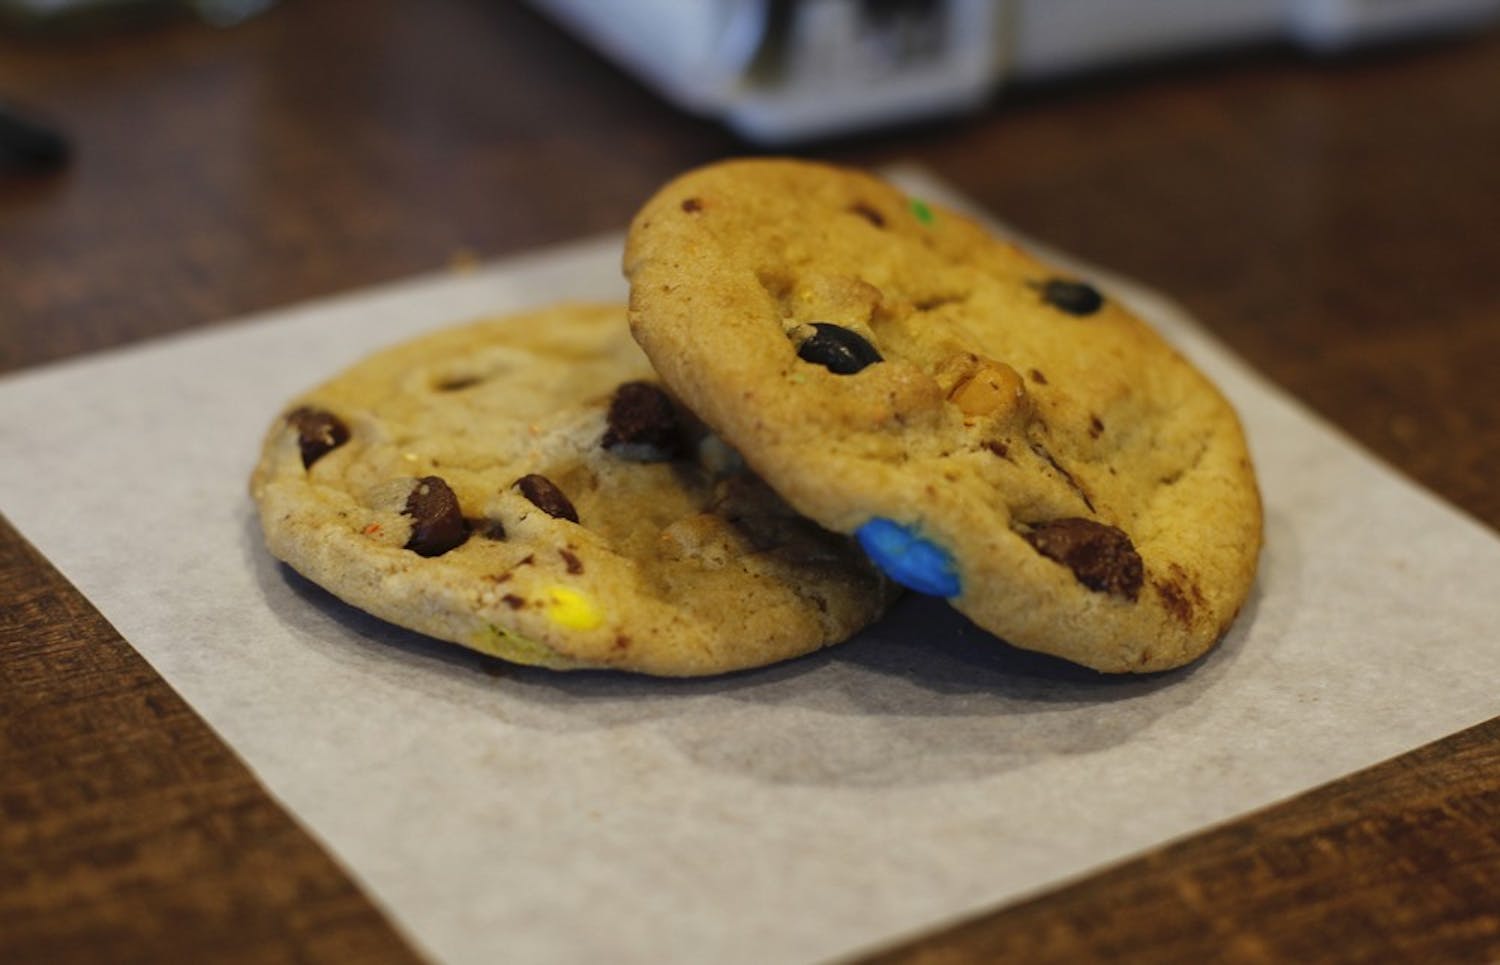 Carolina Dining Service has noticeably changed the recipe and altered the taste of the M&M cookies served in the dining halls on campus.